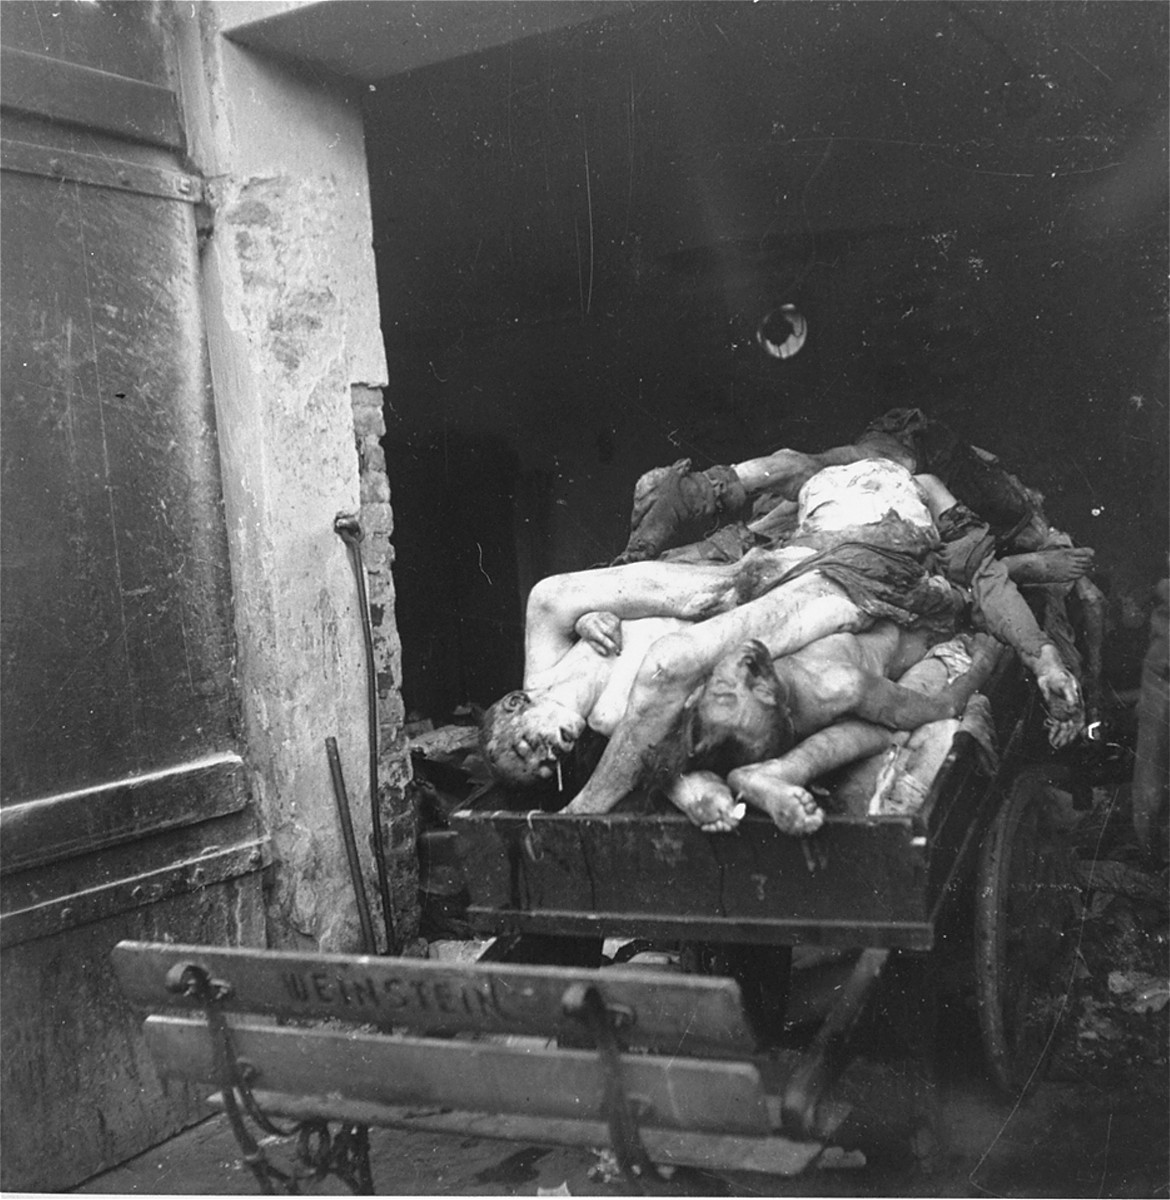 A corpse-laden wagon stands just inside the morgue of the Jewish cemetery on Okopowa Street in the Warsaw ghetto.  

Joest's caption reads: "One of the corpse-bearers opened the door of the shed so I could take photos.  It was an unsettling picture."